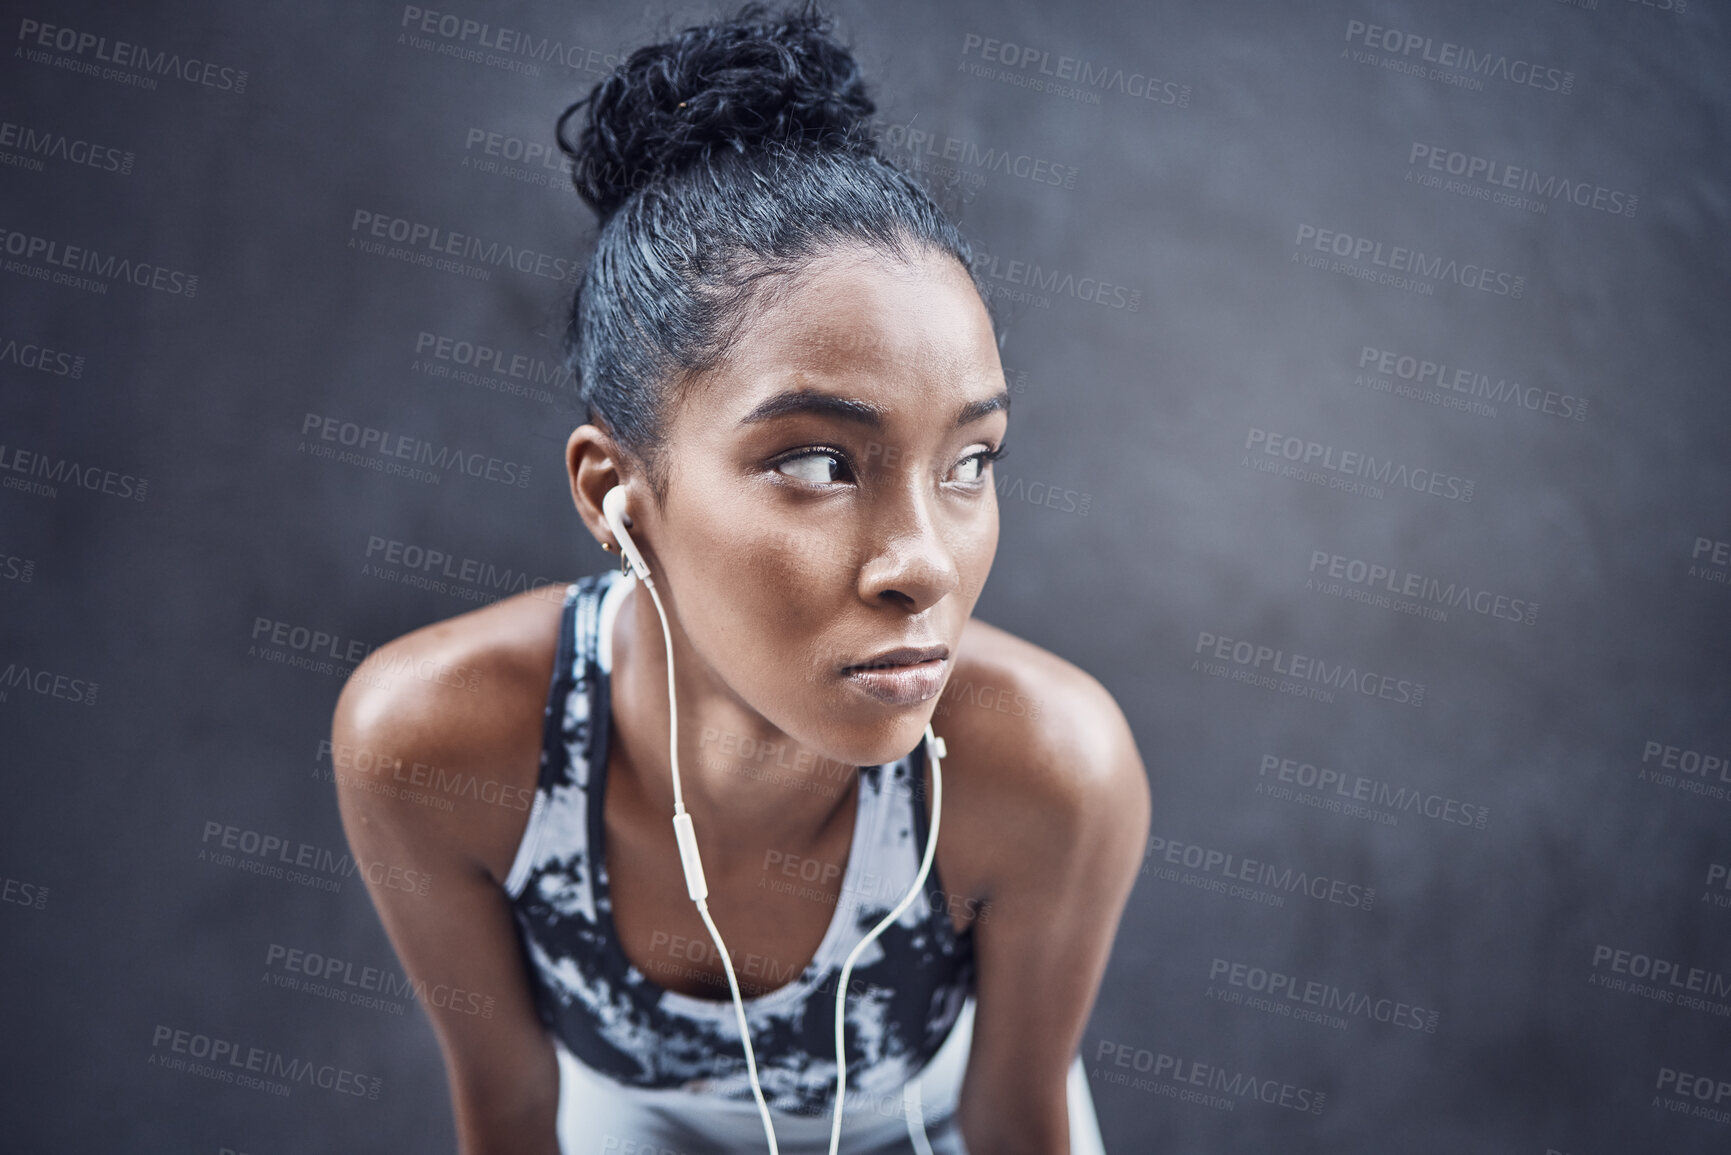 Buy stock photo One active young mixed race woman wearing earphones and taking a rest break after run or jog exercise outdoors. Focused female athlete looking sweaty and tired but determined after challenging workout against a dark background